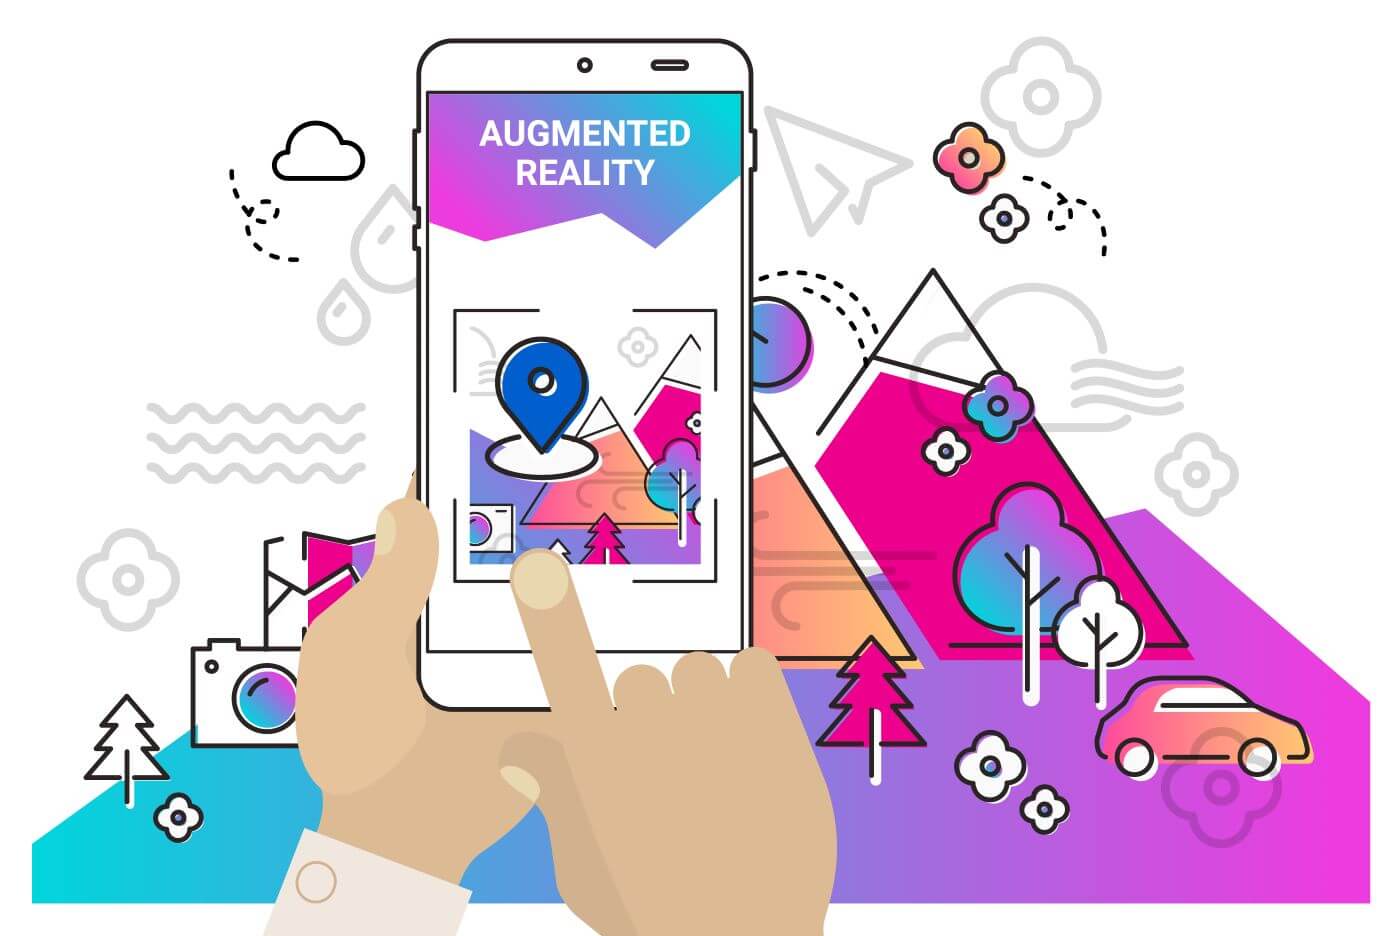 Data-Driven Future of AR in Independent Business